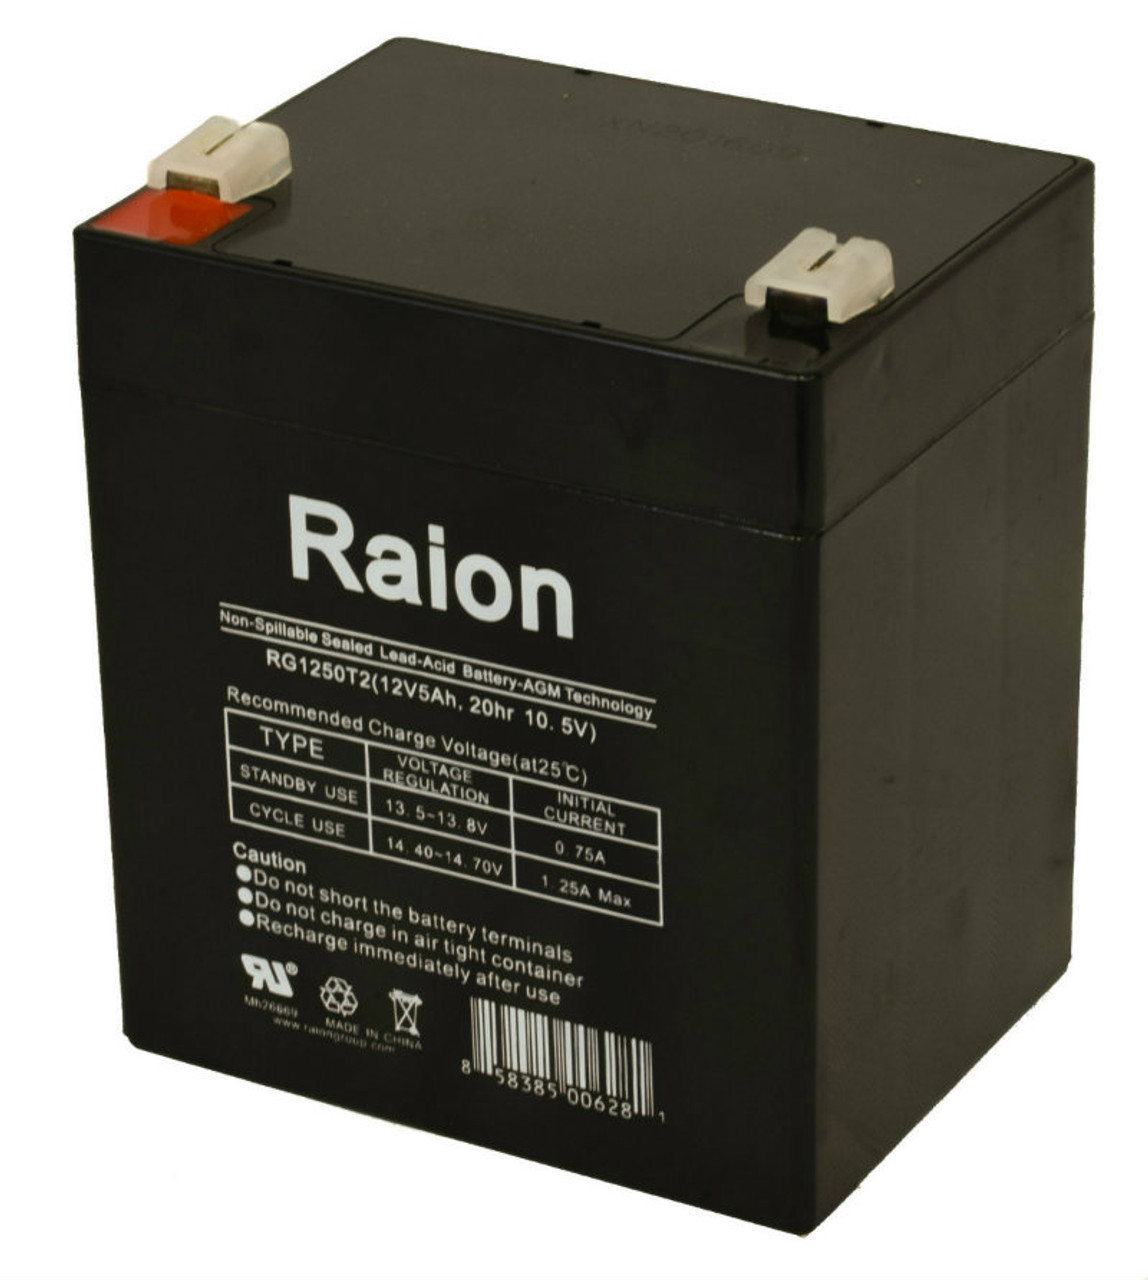 Raion Power RG1250T2 Replacement Battery for PBQ 5.2-12